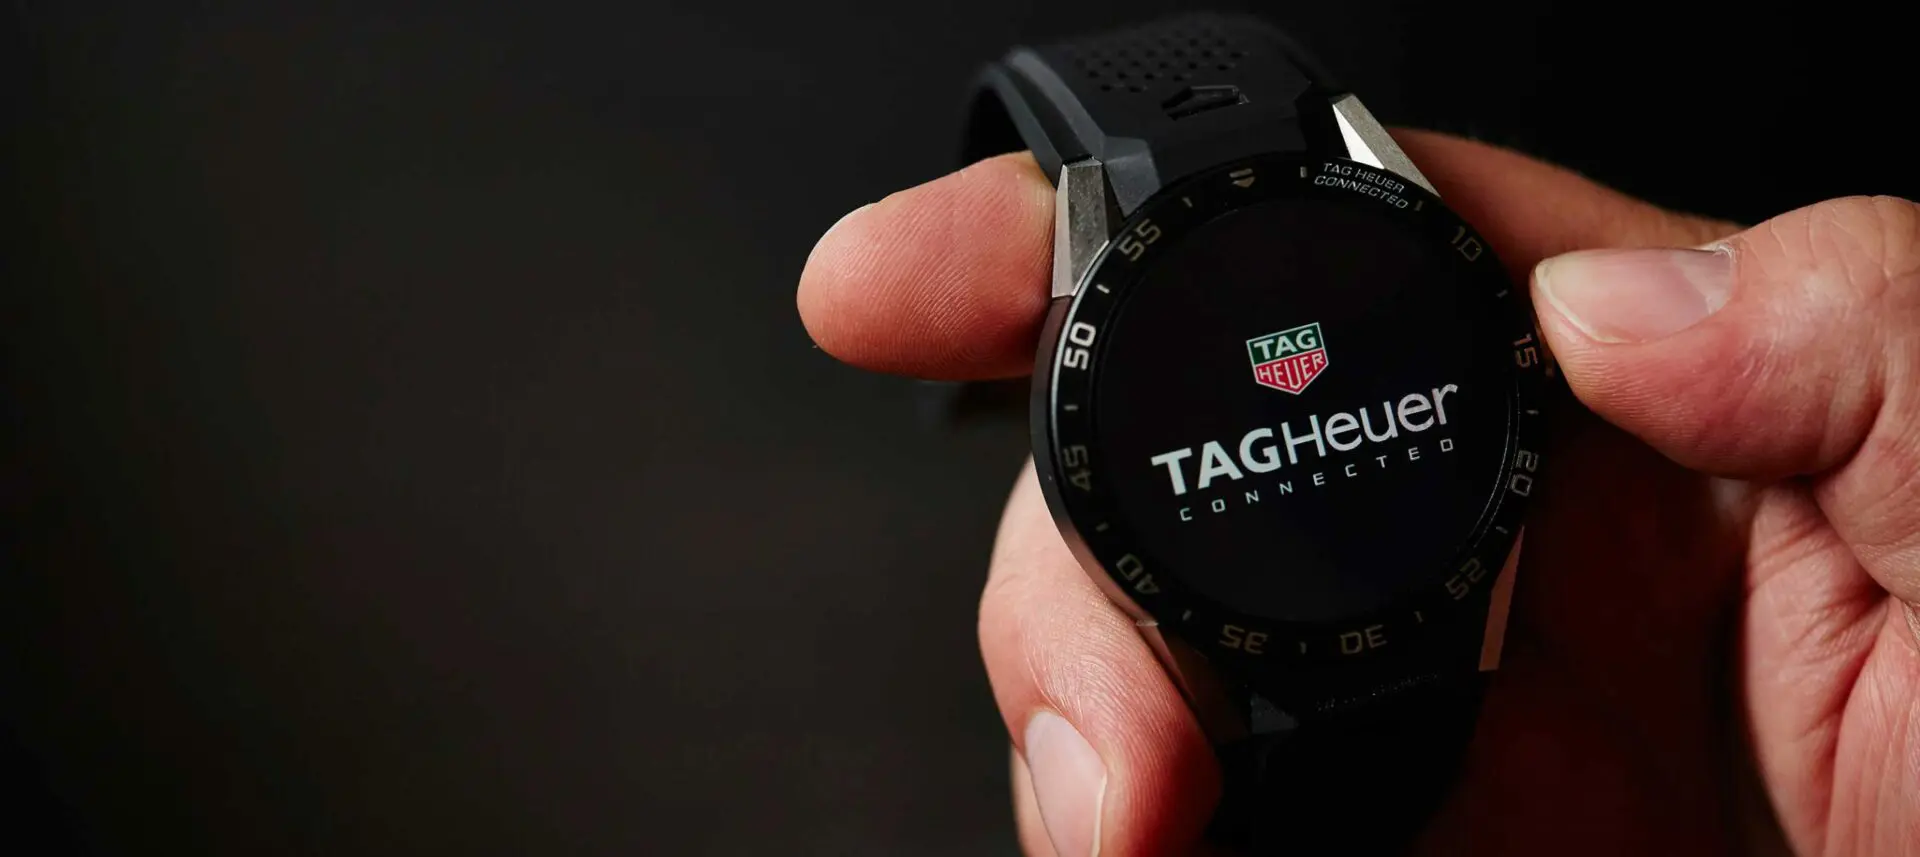 Hands-on review of the TAG Heuer Connected Watch - Watch I Love